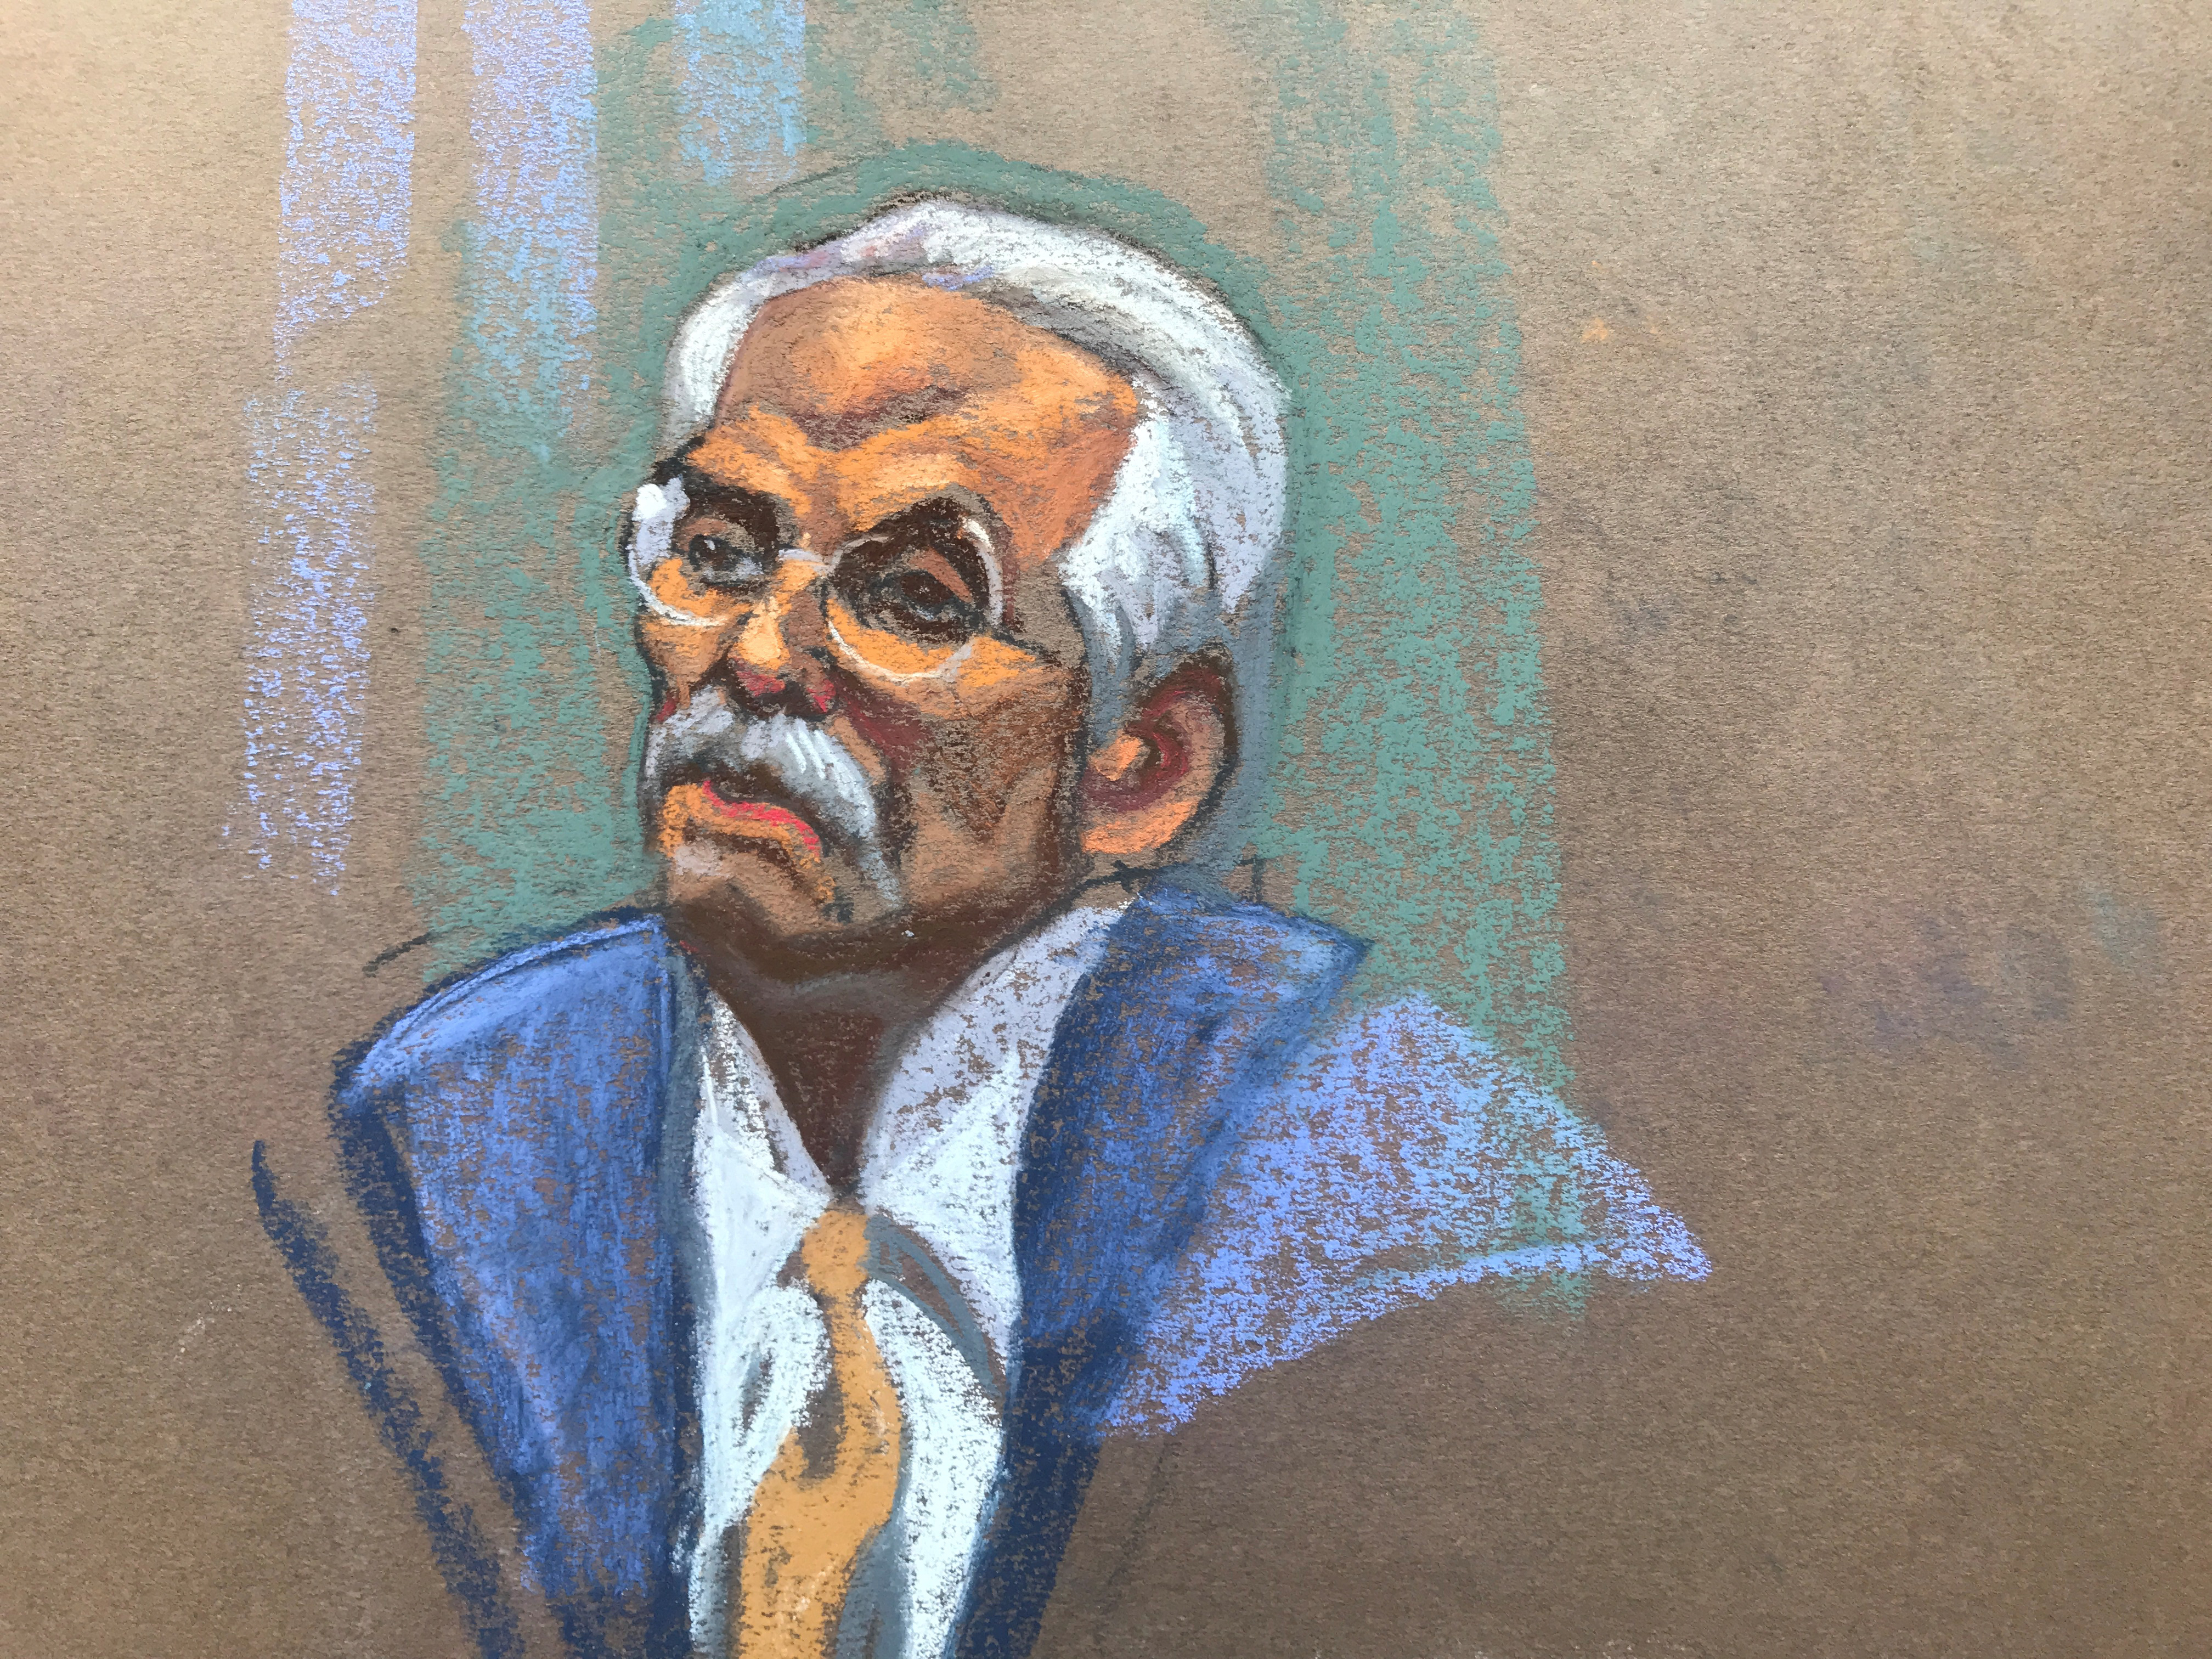 This court sketch shows David Pecker, the former chairman of the National Enquirer’s parent company, American Media Inc. Pecker testified in Day 5 of former President Donald Trump’s criminal hush money trial taking place in criminal court in Manhattan, New York.